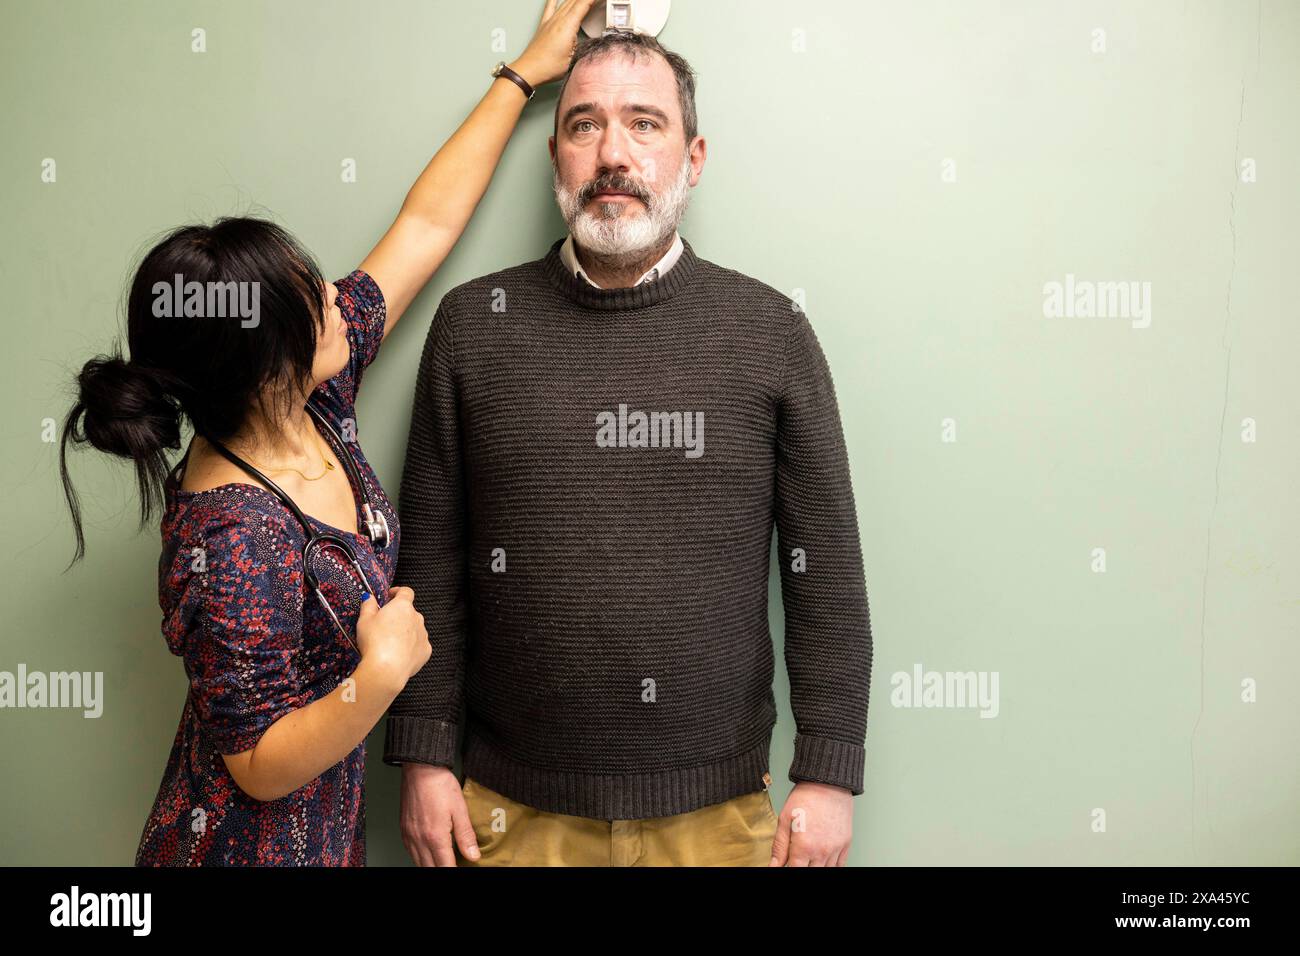 Woman measuring man's height against a wall in a medical practice Stock Photo